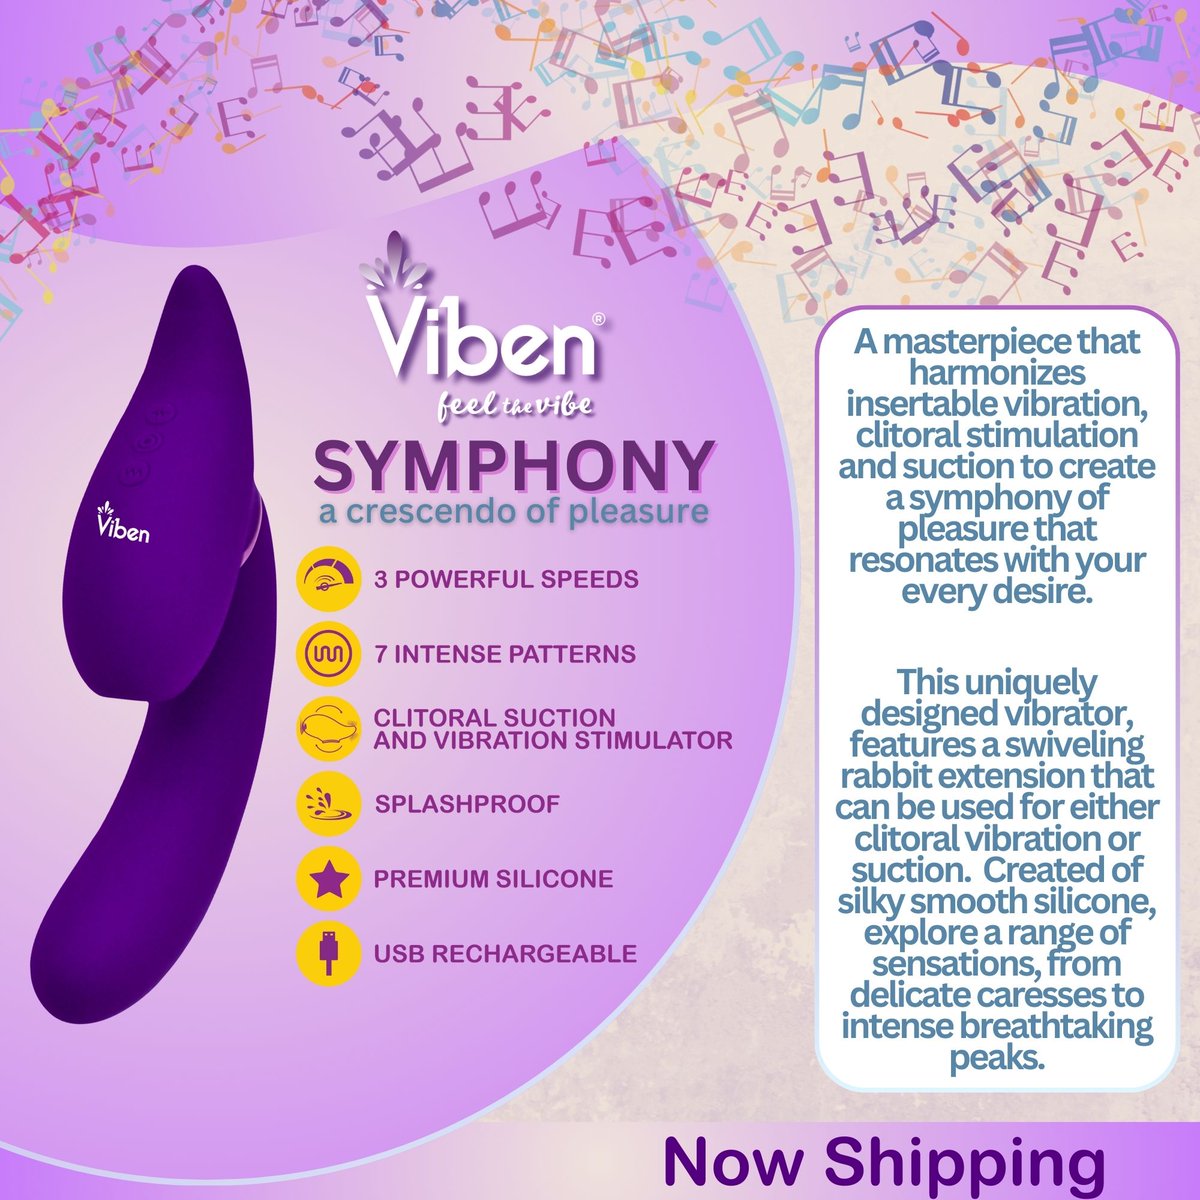 Viben's Symphony is now shipping! Order yours today! 

#viben #vibentoys #symphony #feelthevibe #feelthevibes